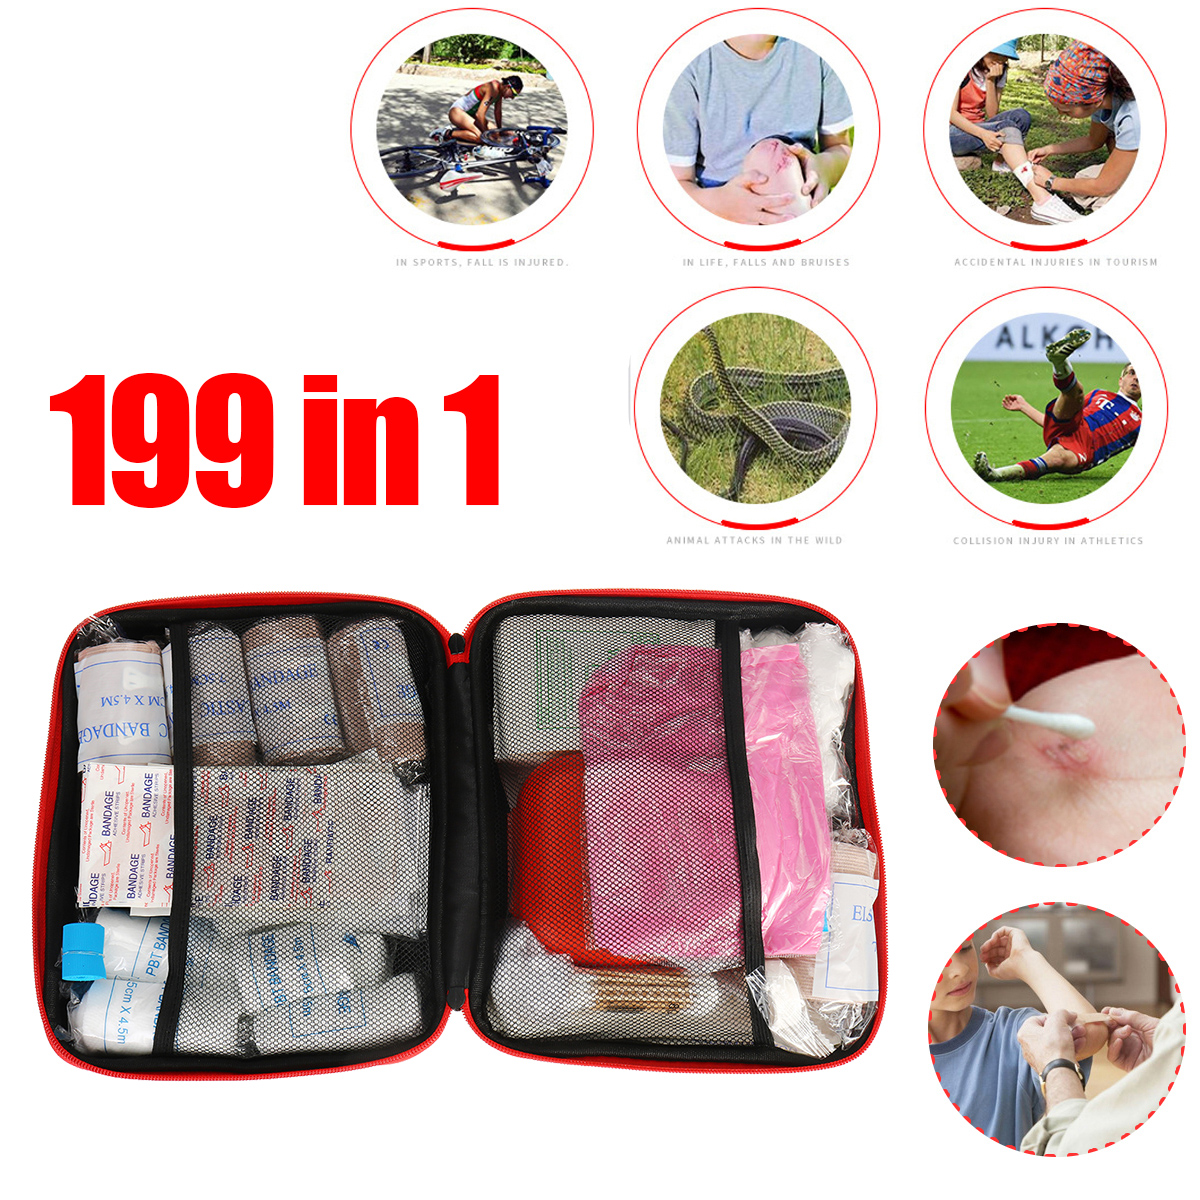 199Pcs-Survival-First-Aid-Kit-Portable-Outdoor-Camping-SOS-Self-Defense-Safety-Emergency-Tools-Bag-1572069-3